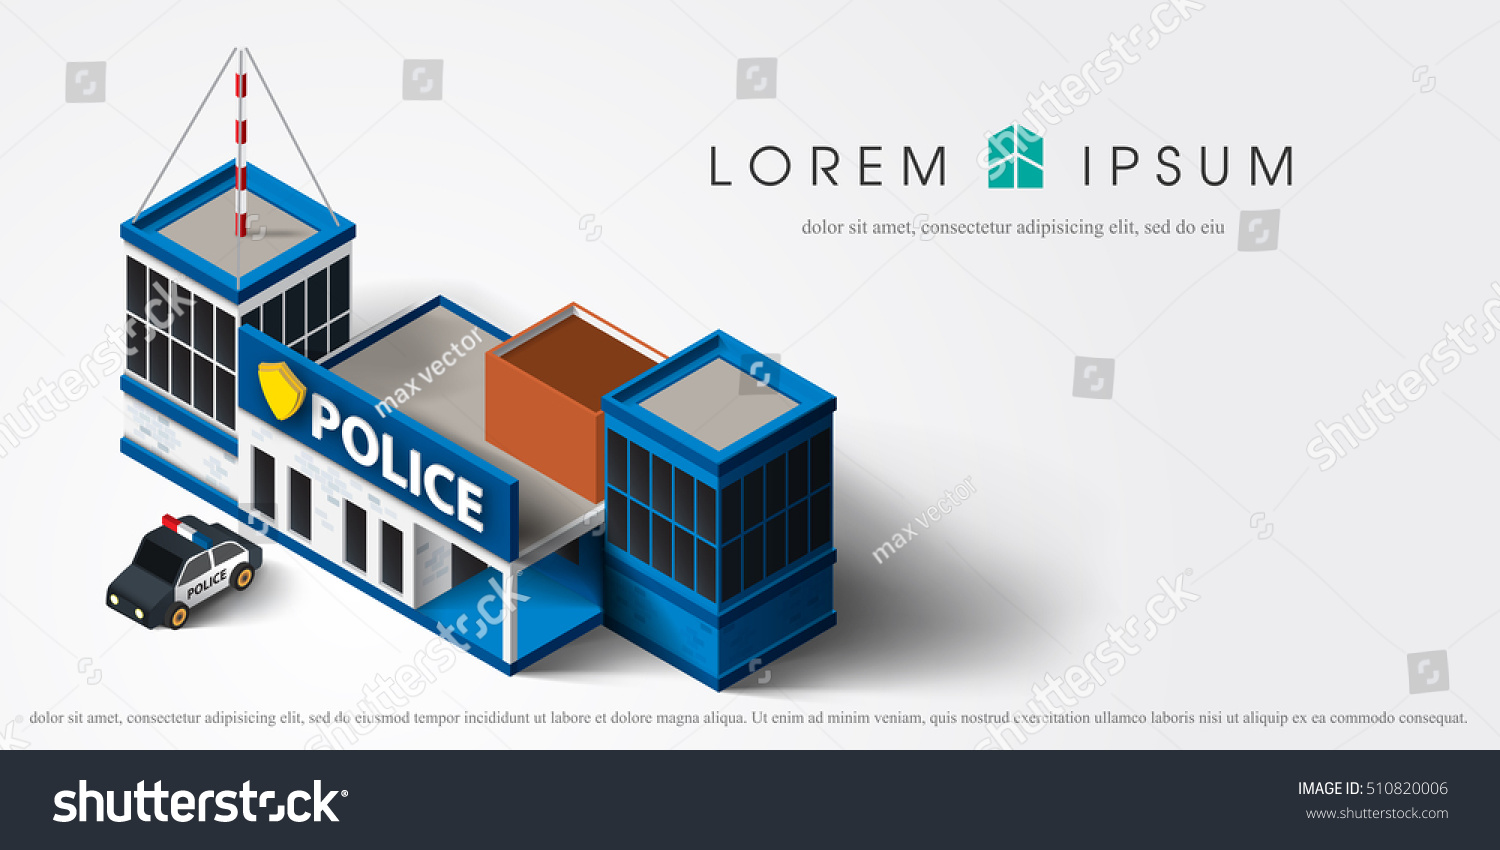 Stock Vector  D City Police Station Department Isometric Building With Police Car In Flat Style Isolated On 510820006 